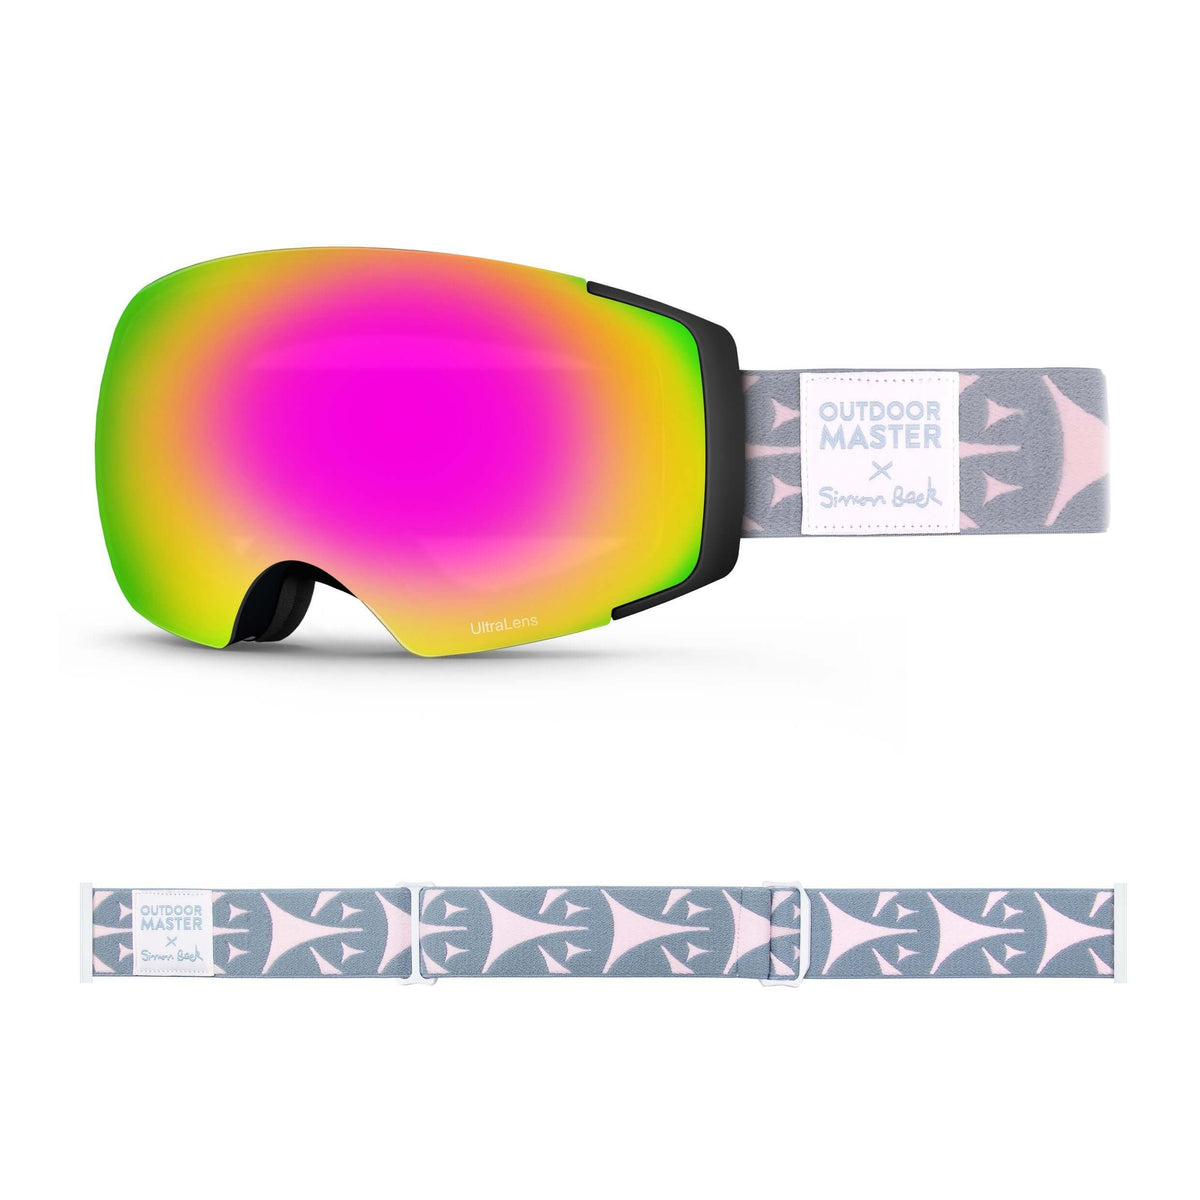 OutdoorMaster x Simon Beck Ski Goggles Pro Series - Snowshoeing Art Limited Edition OutdoorMaster UltraLens VLT 22% Optimized Orange with REVO Pink Bouncy Triangles